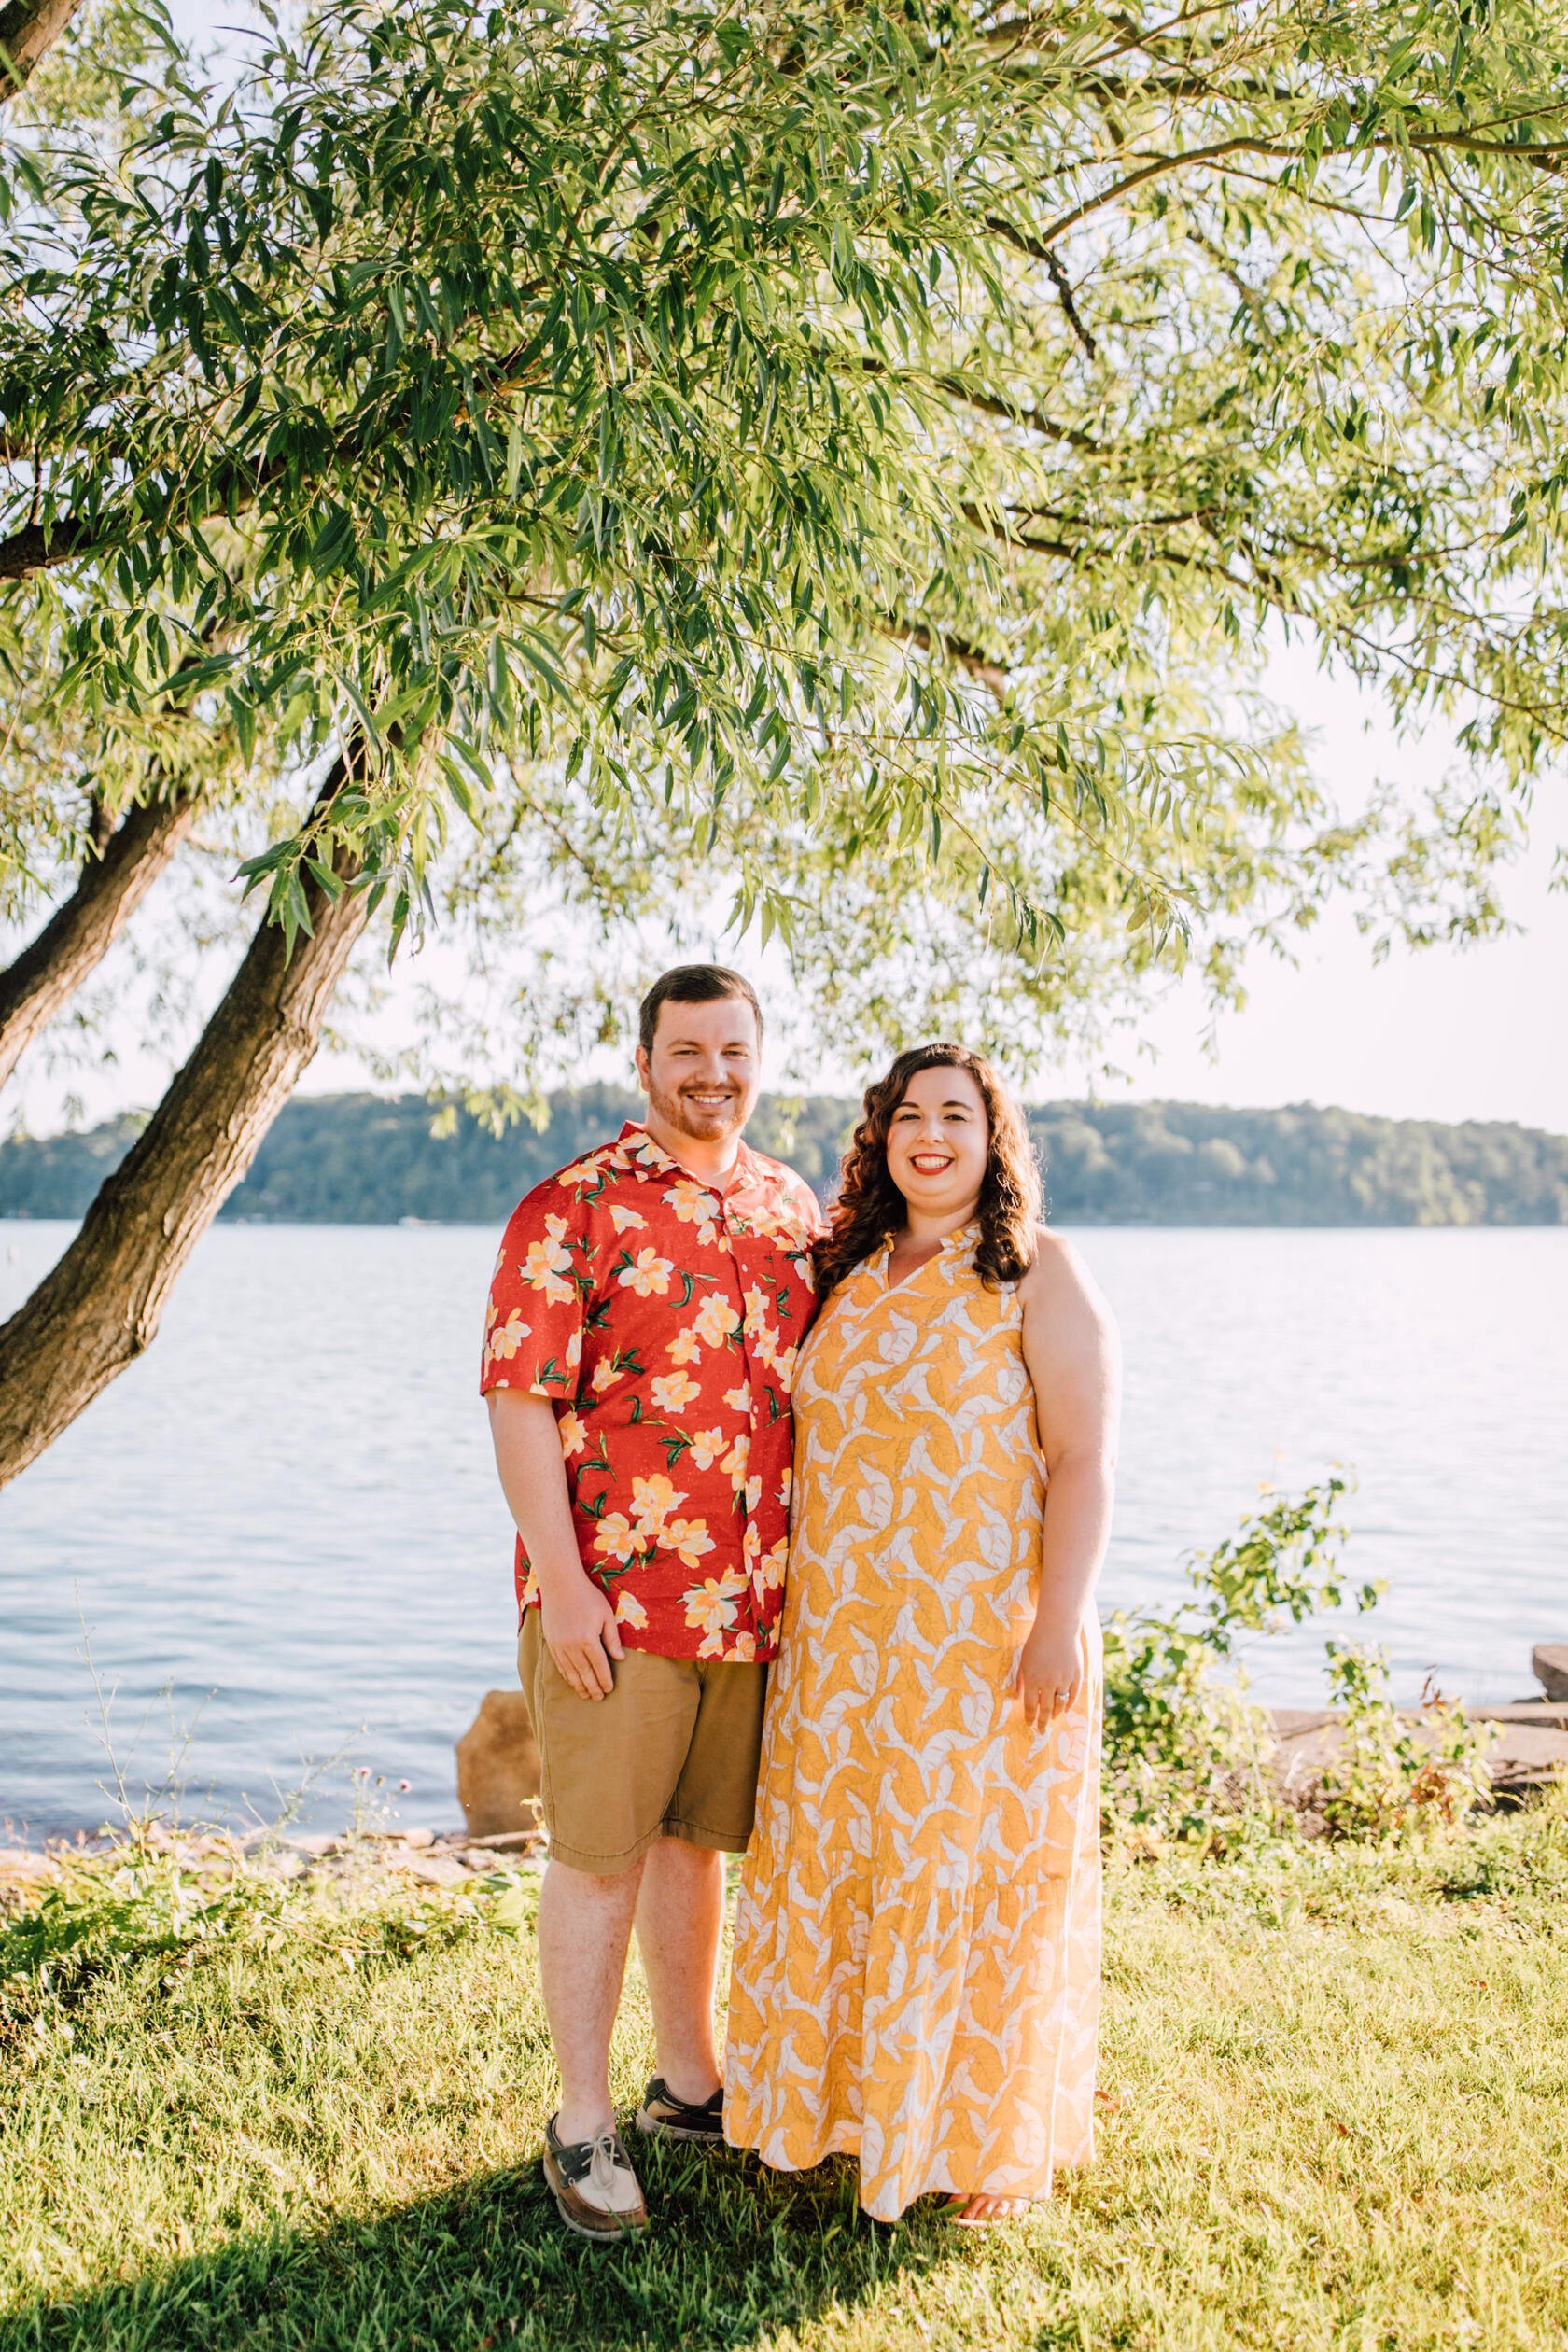  Hanna and Brandon stand together for lakefront photography at Lake Ontario for their engagement 